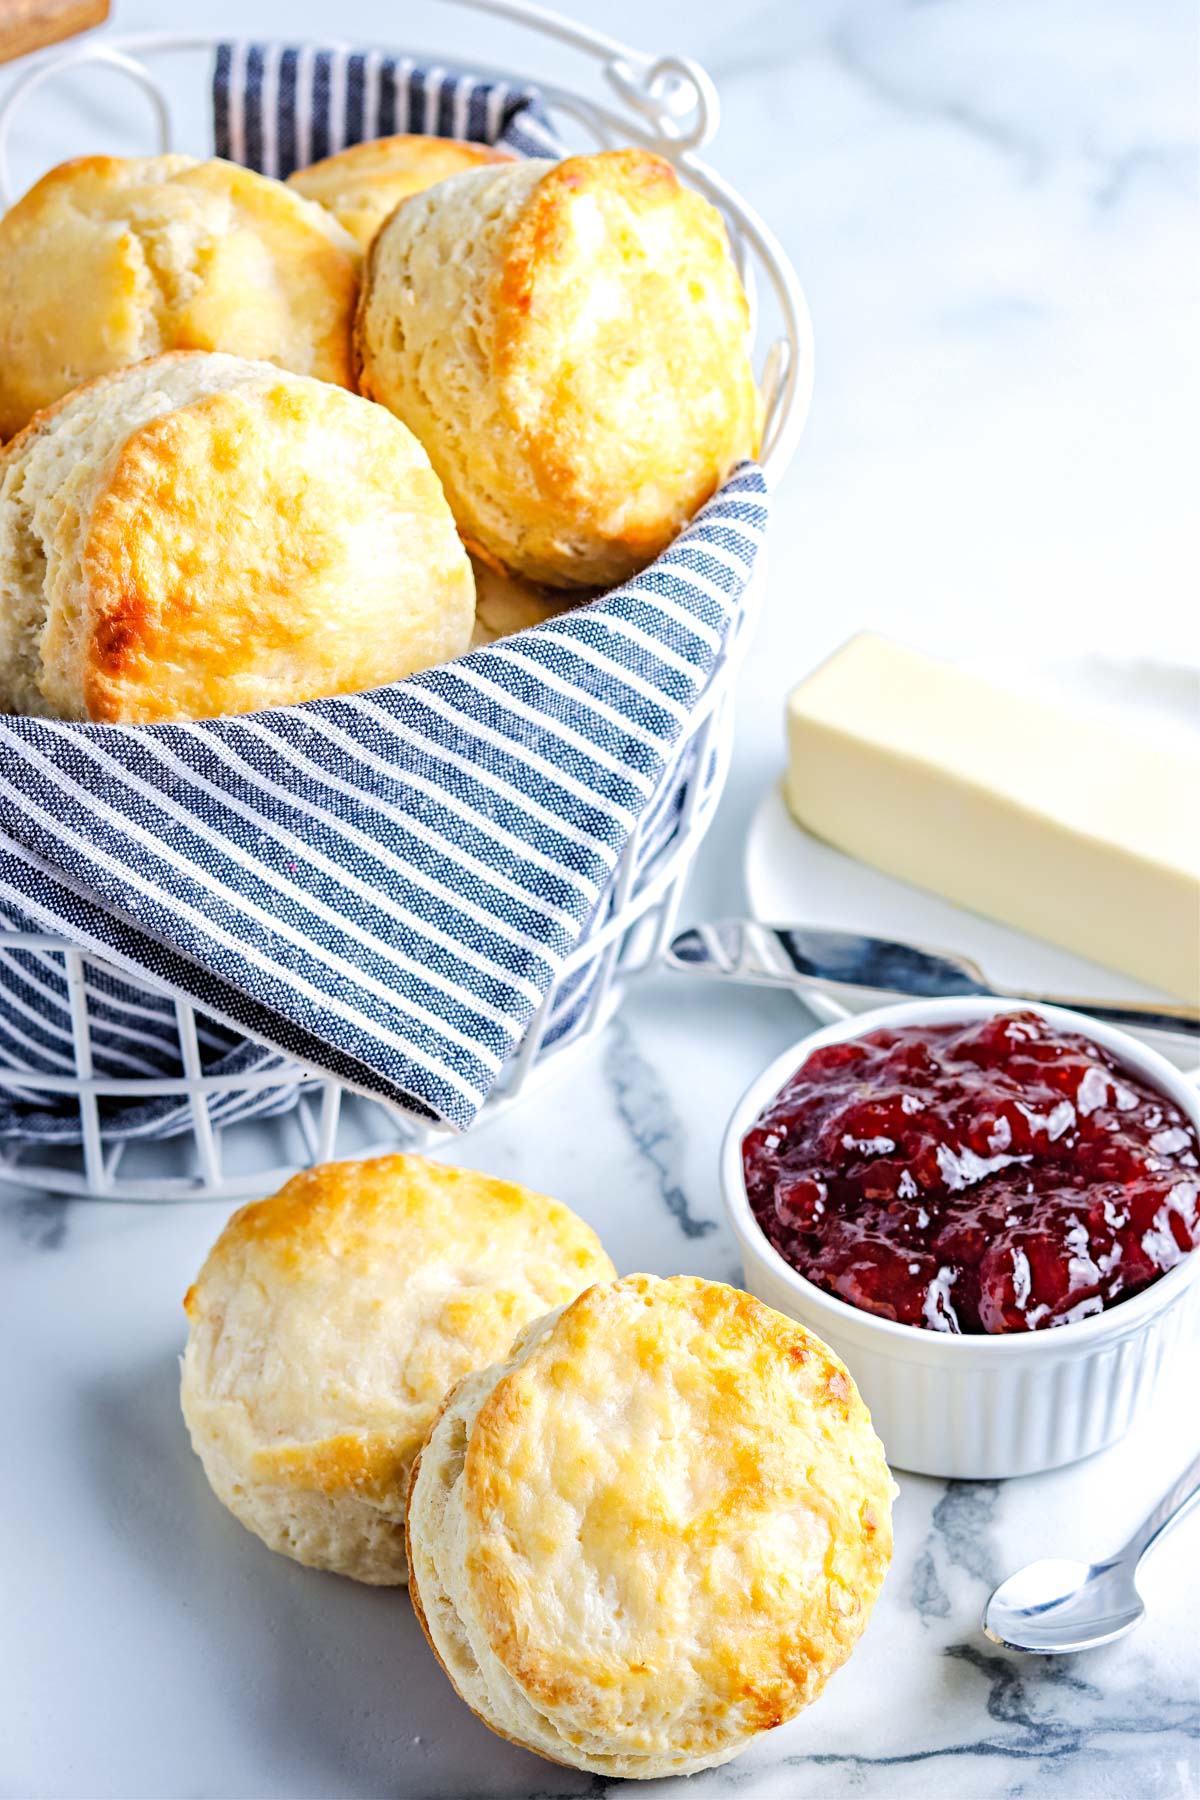 A basket full of the finished buttermilk biscuit recipe.